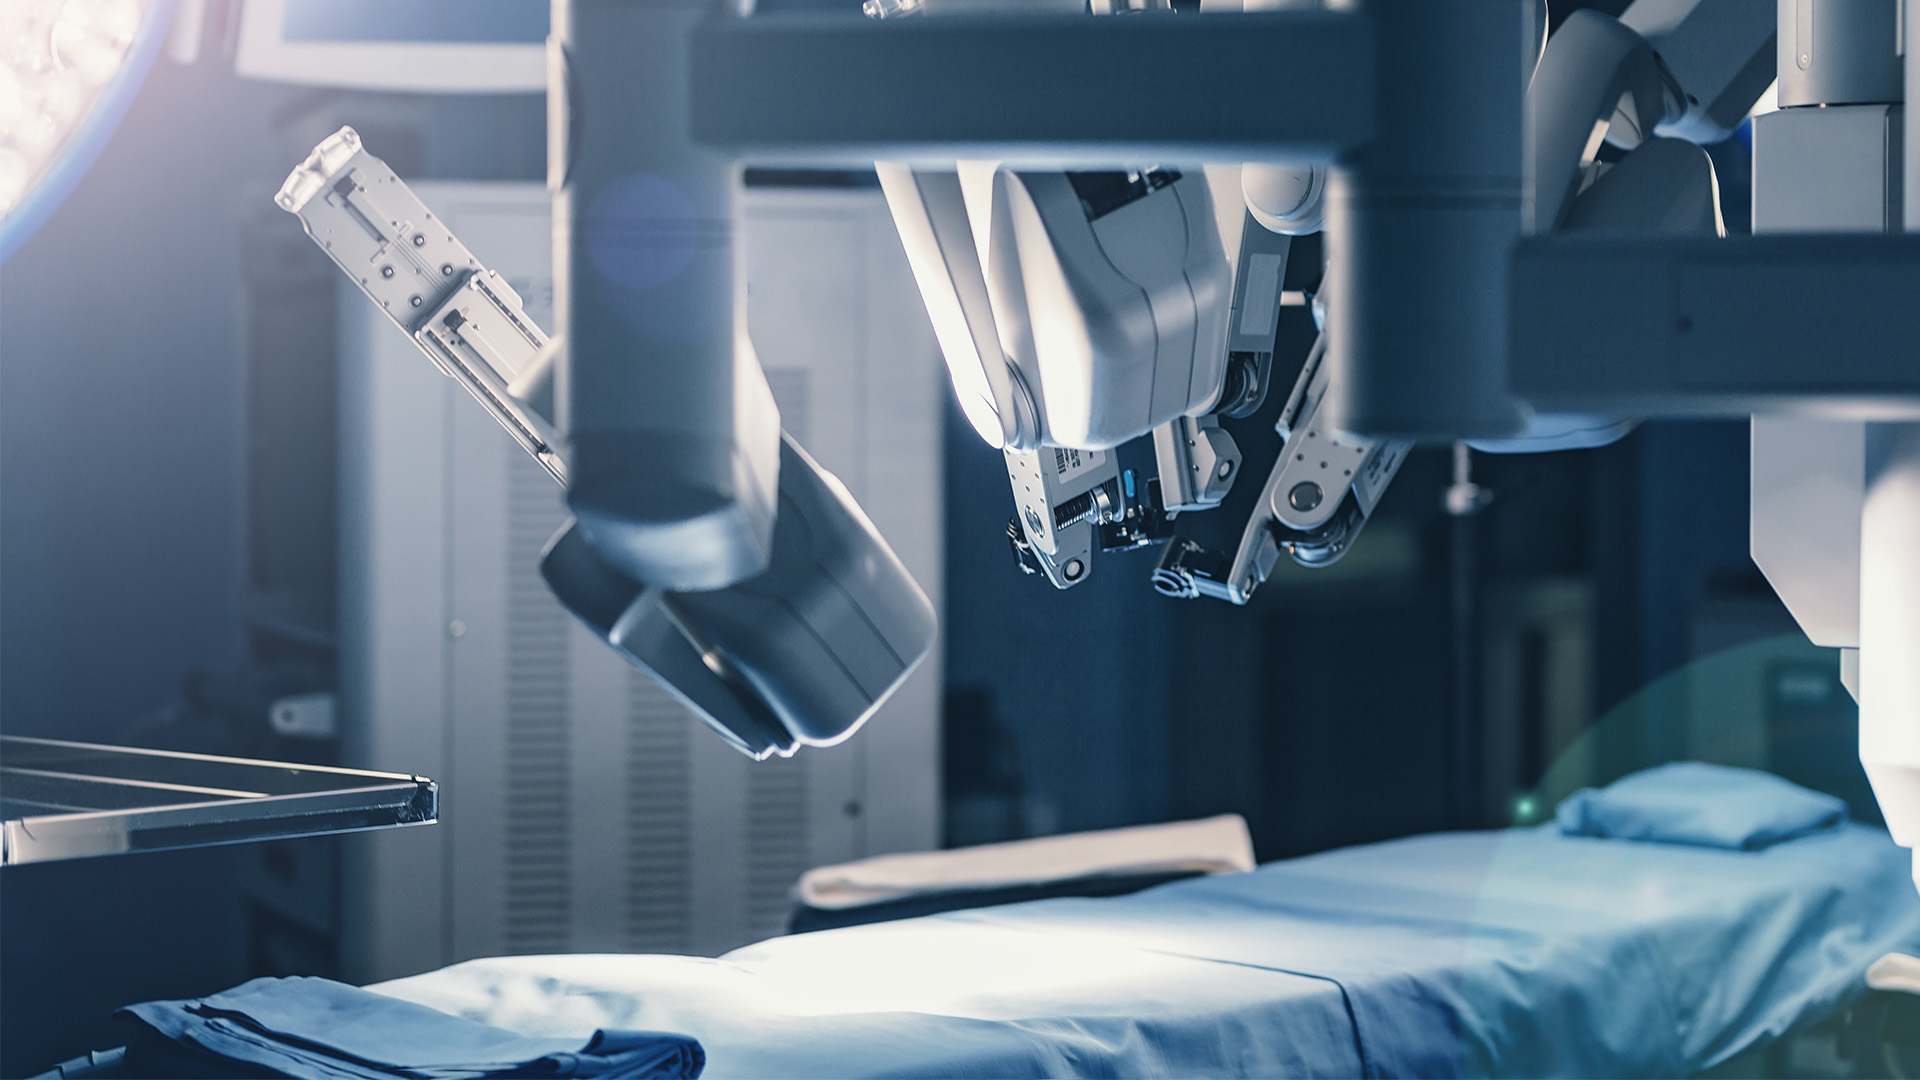 How Robots Assist Doctors in Orthopedic Surgery